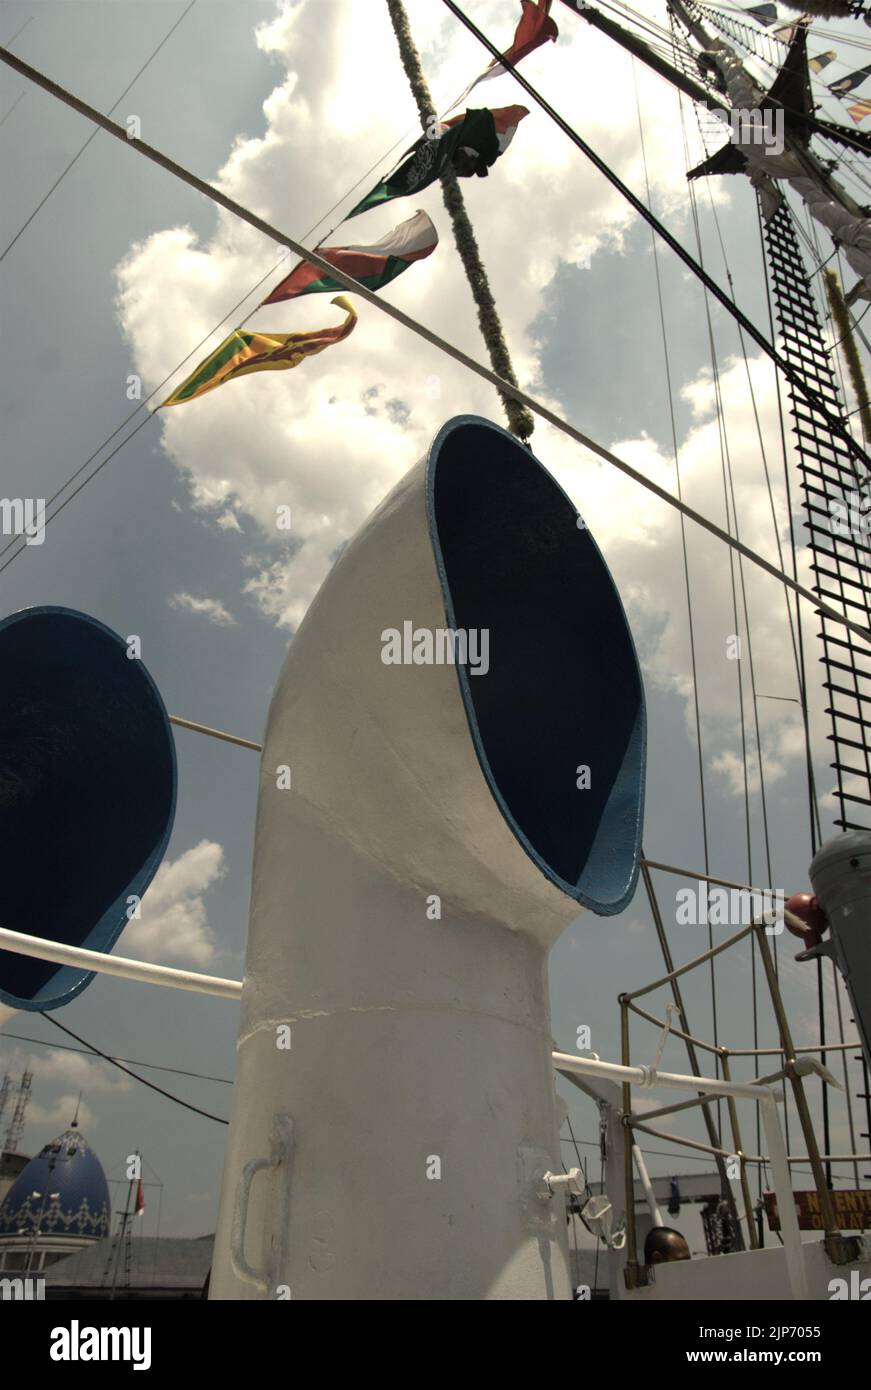 Ship vents on KRI Dewaruci (Dewa Ruci), an Indonesian tall ship, as the barquentine type schooner is opened for public visitors at Kolinlamil harbour (Navy harbour) in Tanjung Priok, North Jakarta, Jakarta, Indonesia. Stock Photo